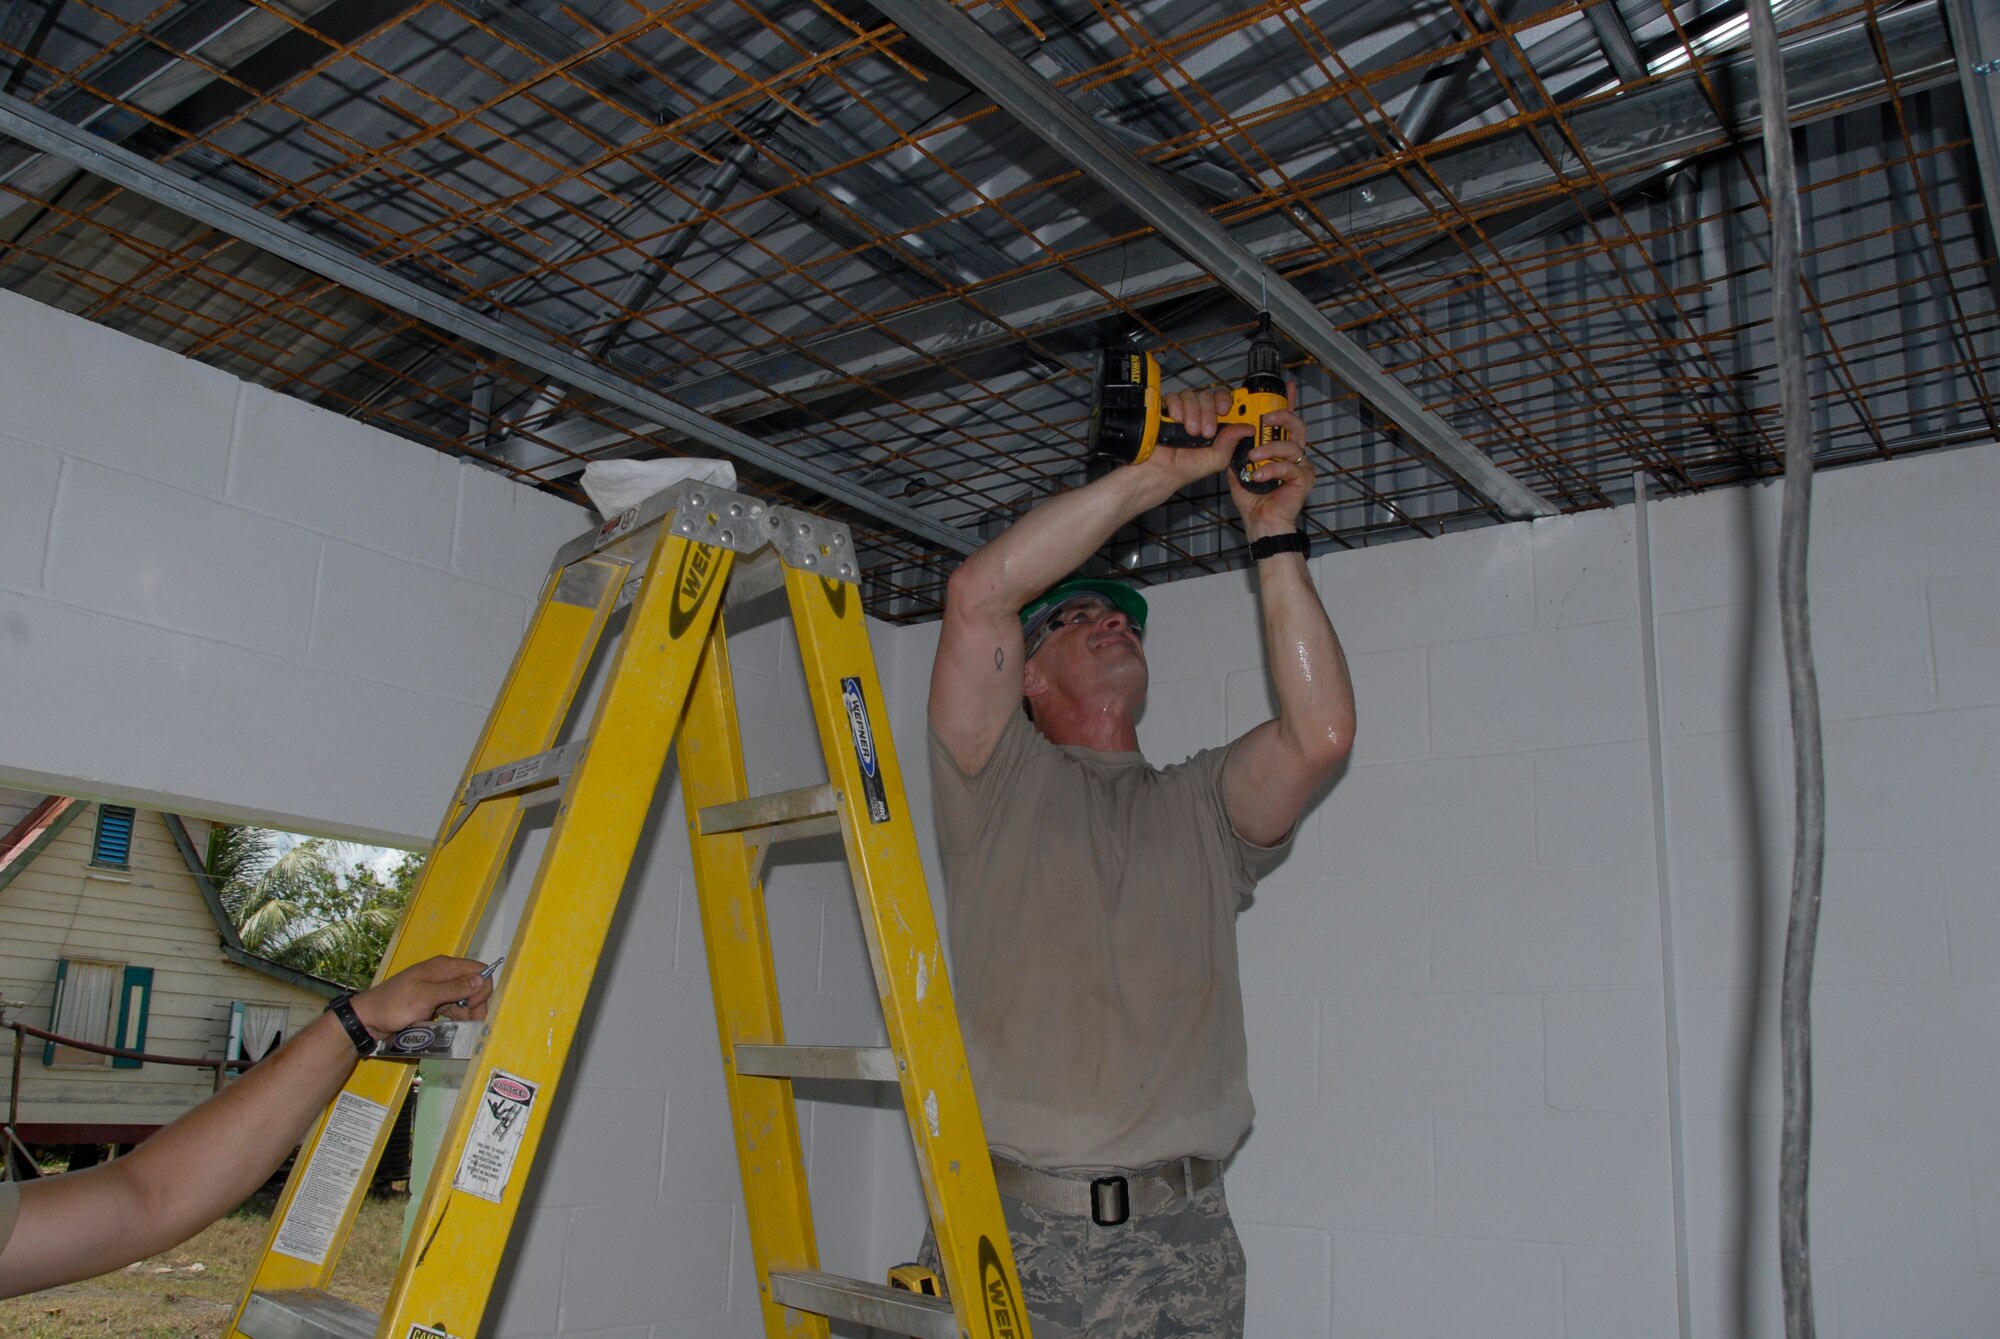 PARAMARIBO, SURINAME - Master Sgt. Mike Clausen, 1st Sgt. for the 114th Fighter Wing Civil Engineer Squadron, helps hang a piece of ridge brace at the Alkmaar Clinic being built in the Commewijne district here July 13, 2011.  The clinic is being built in support of the New Horizons 2011 exercise.   (Air Force Photo by Tech. Sgt. Quinton Young)(RELEASED) USAF